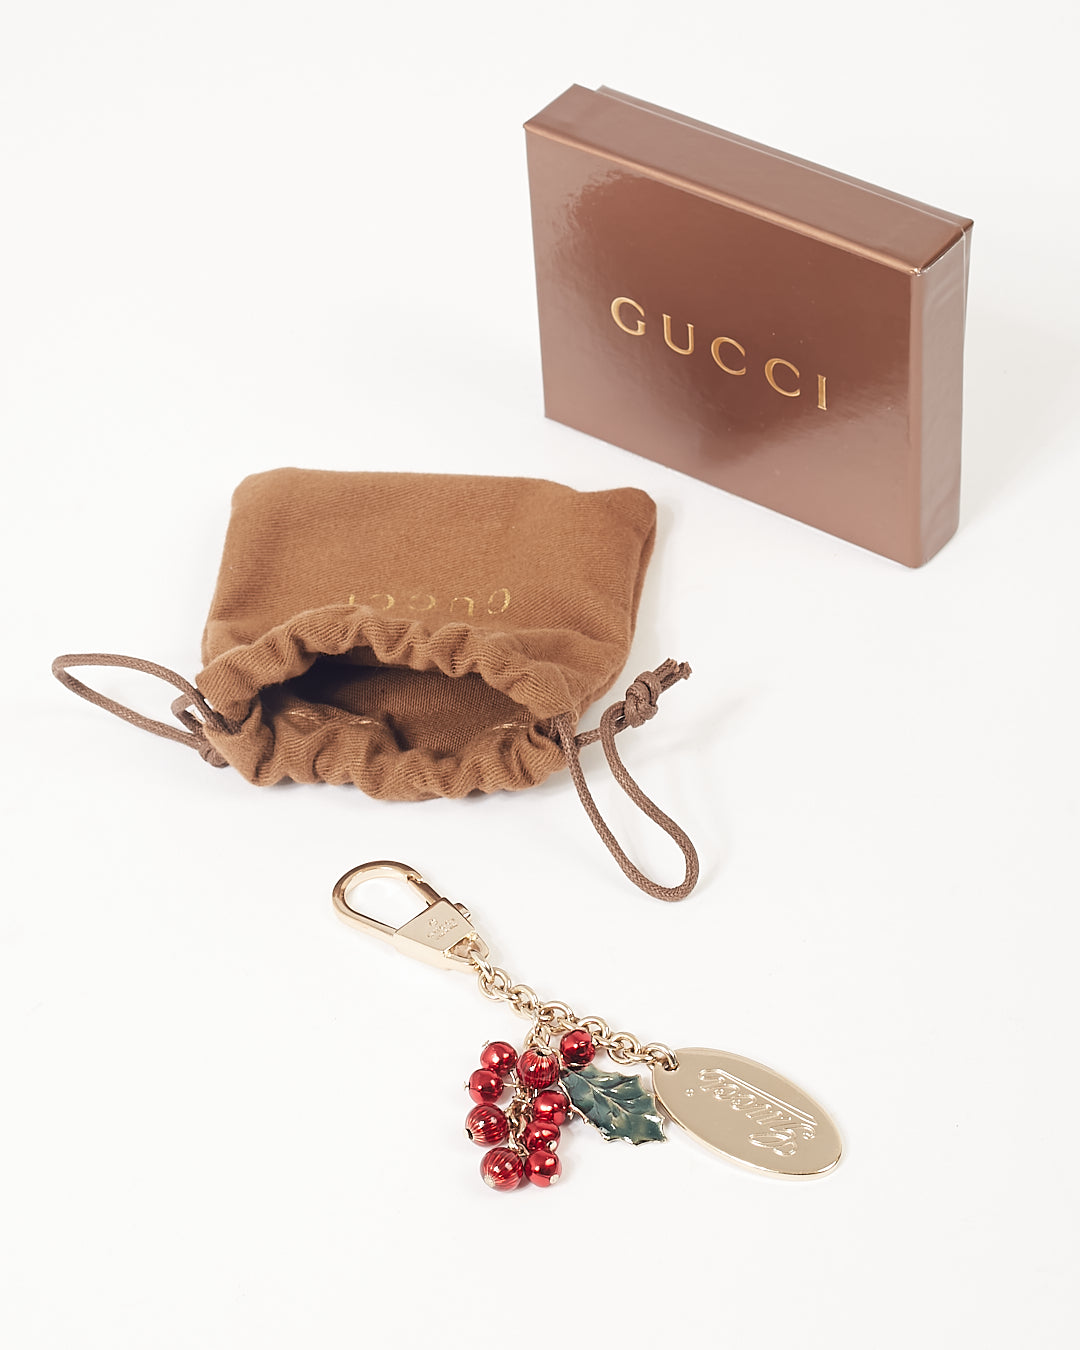 Charme de sac/porte-clés Holly Red Berry ton or Gucci